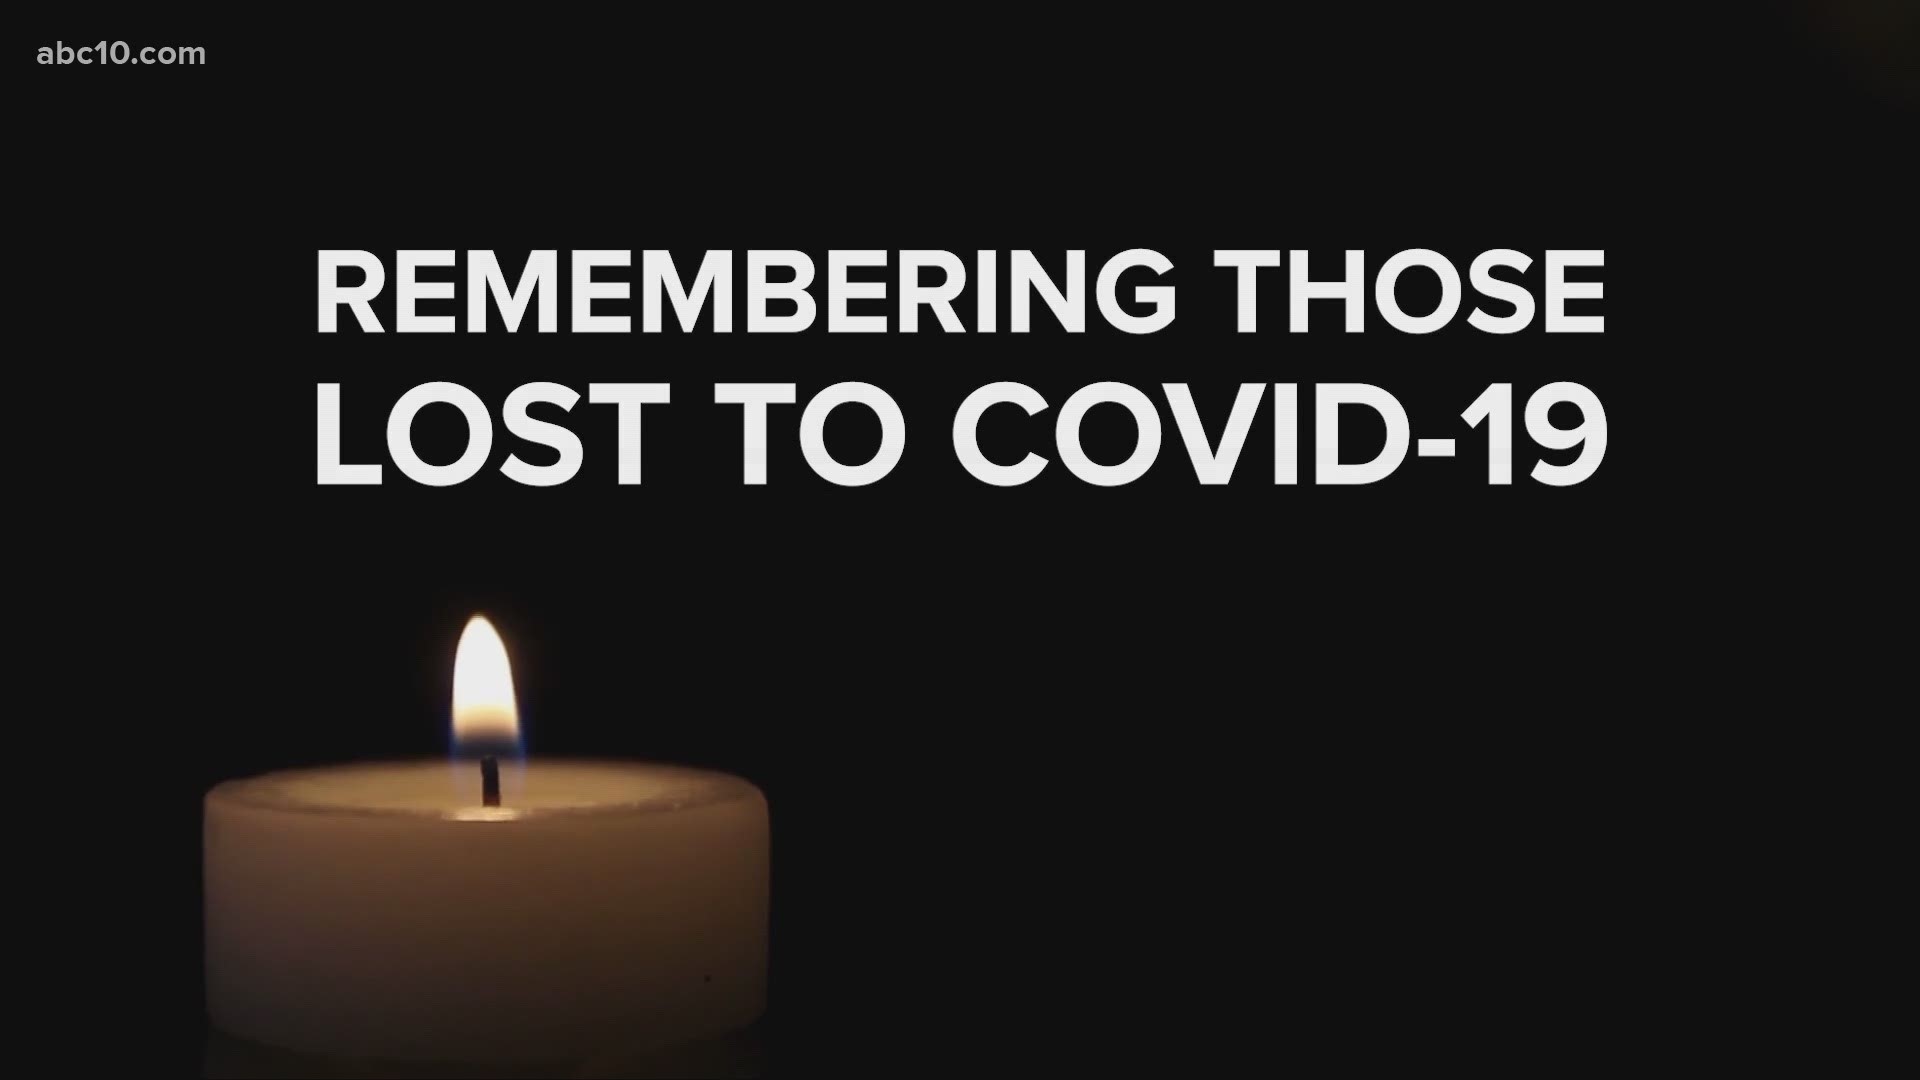 Over 1,000 people died from COVID-19 in Sacramento County. Family and friends remember the lives lost due to the deadly virus.